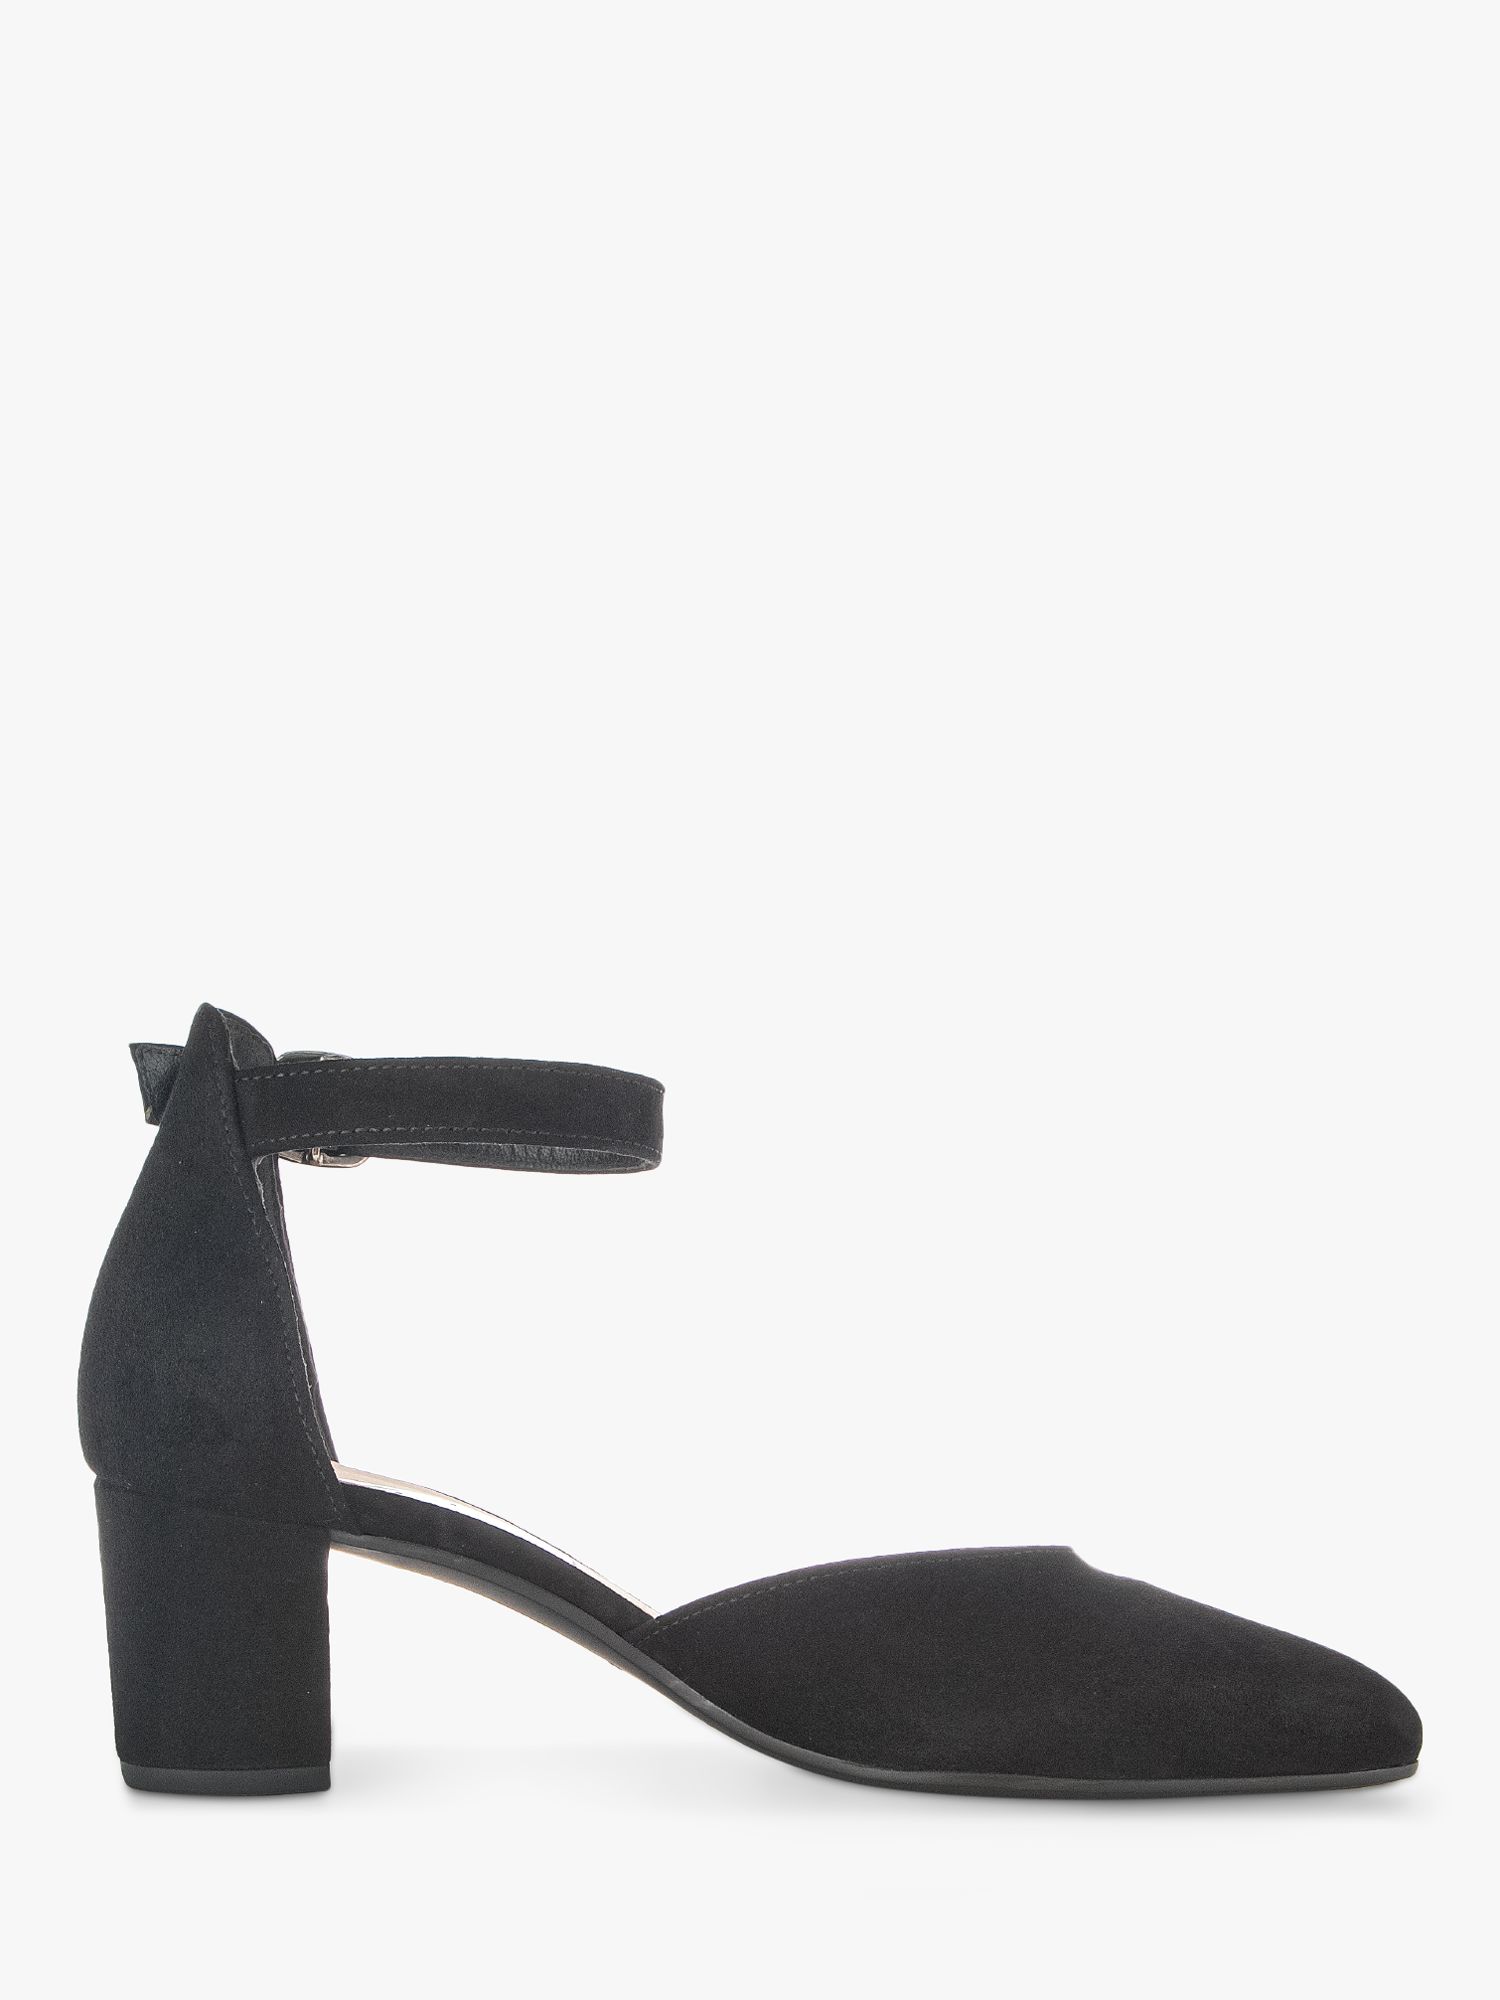 Gabor Gala Suede Ankle Strap Court Shoes, Black